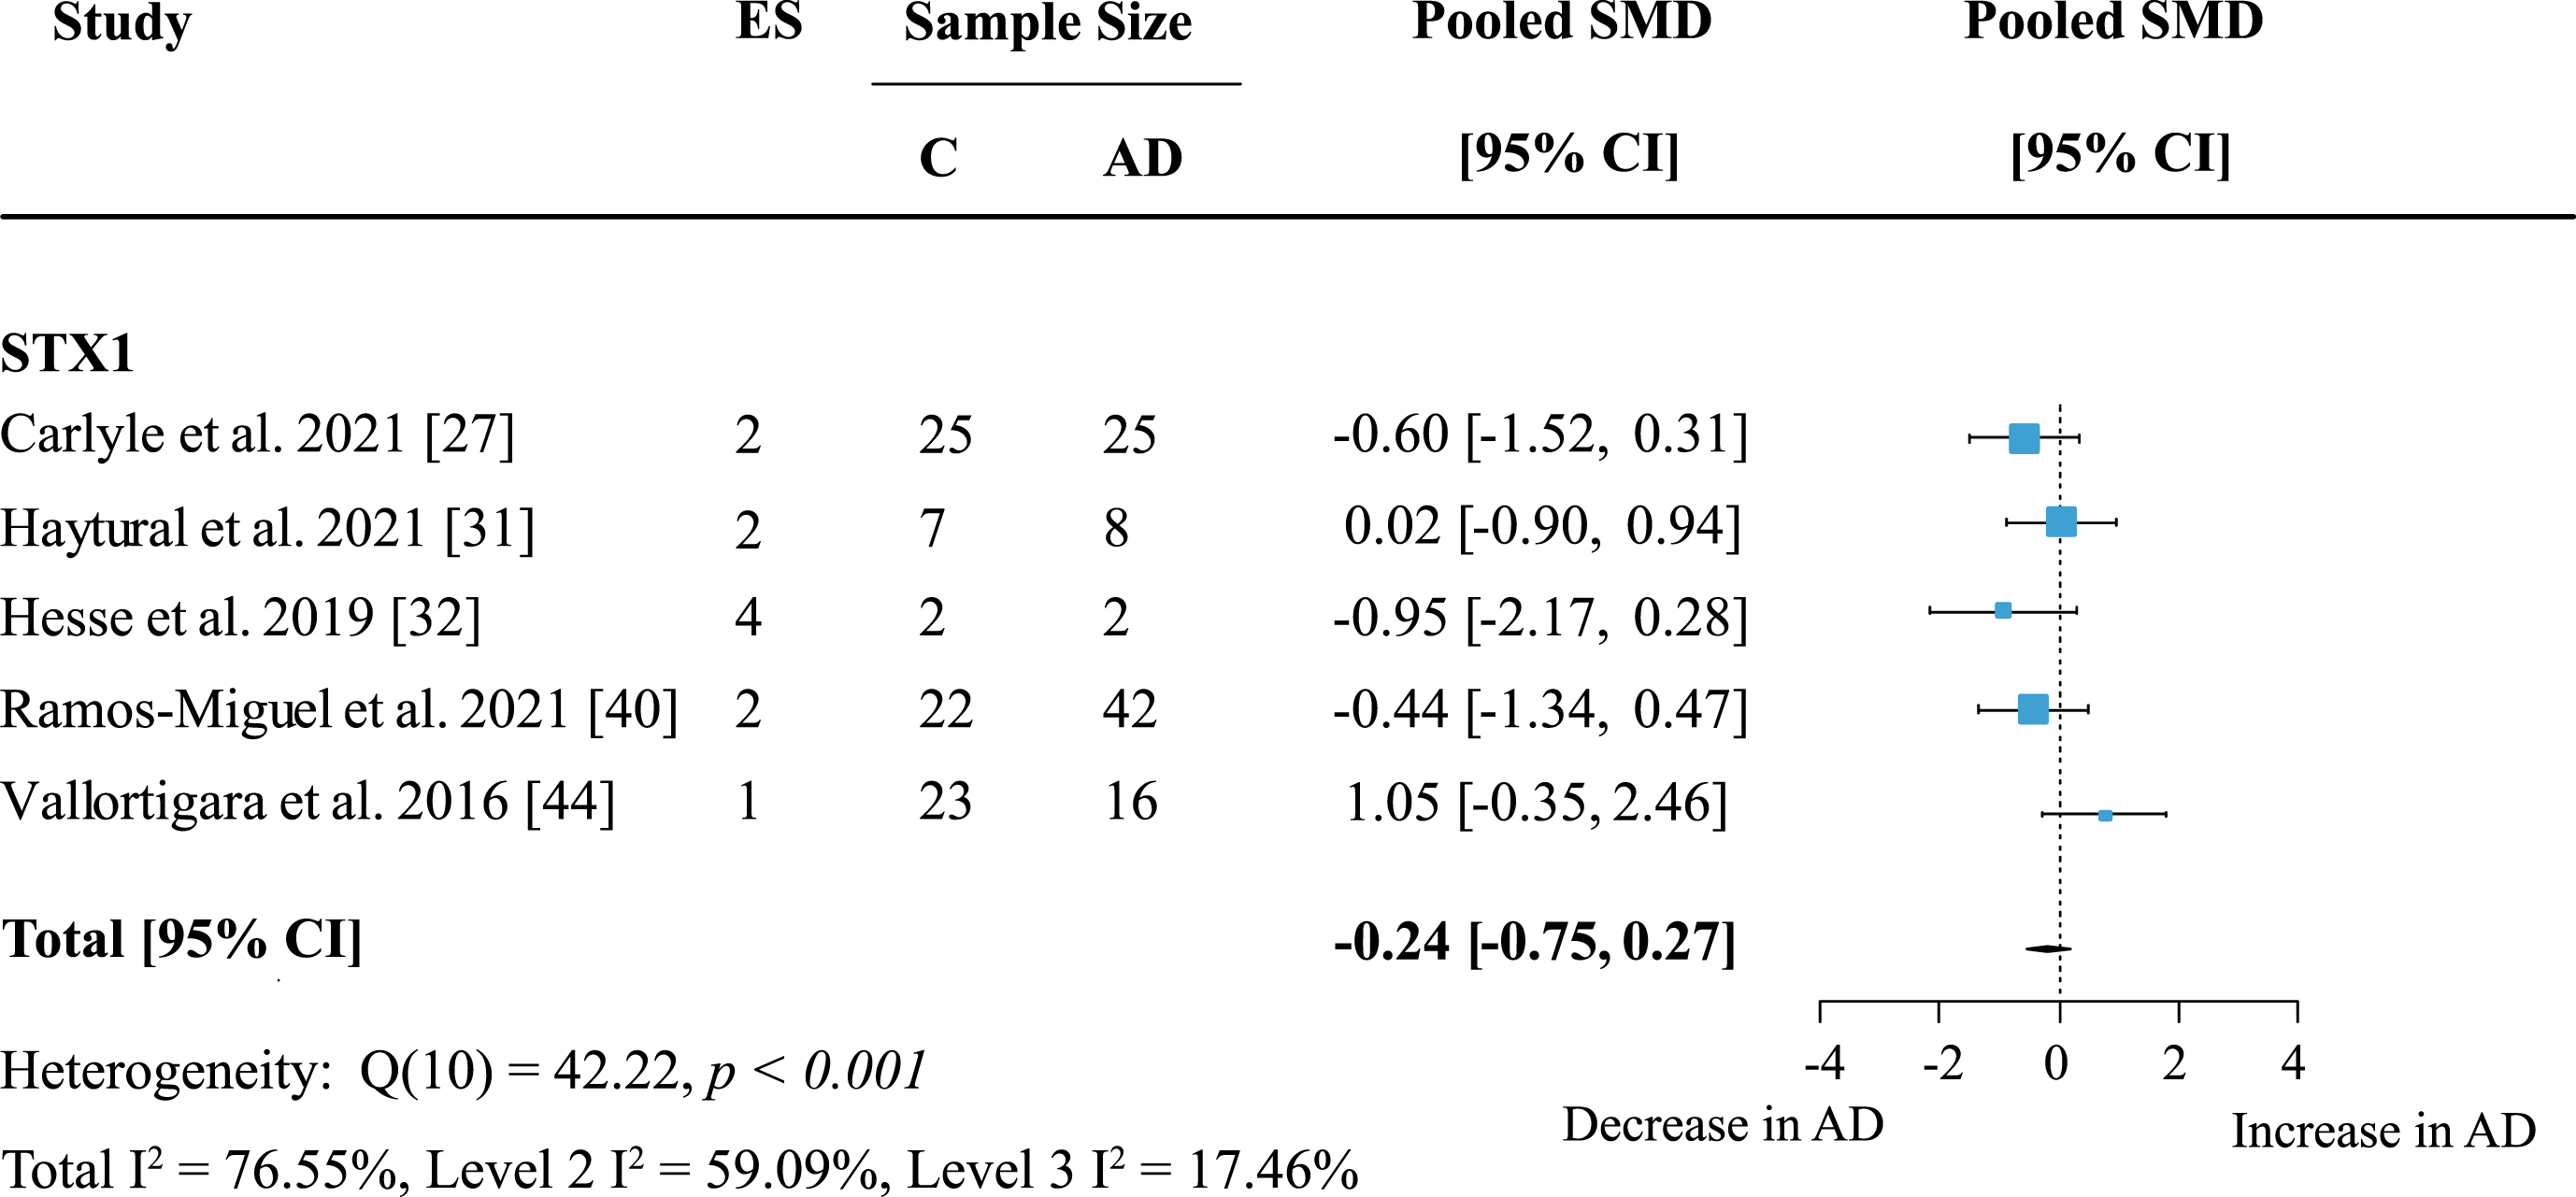 Syntaxin 1 loss in AD. Forest plot of three-level random effects meta-analysis on syntaxin 1 levels. No significant decrease in AD (p = 0.35) was obtained. Effect sizes were aggregated to one value per study. Size of effect size symbol represents its weight. Sample sizes represent the maximum n per group contributing to the analysis for each study. Dashed line depicts no difference between control and AD cohort. AD, Alzheimer’s disease, CI, confidence interval; C, Control; ES, effect size; SMD, standardized mean difference; STX1, Syntaxin.